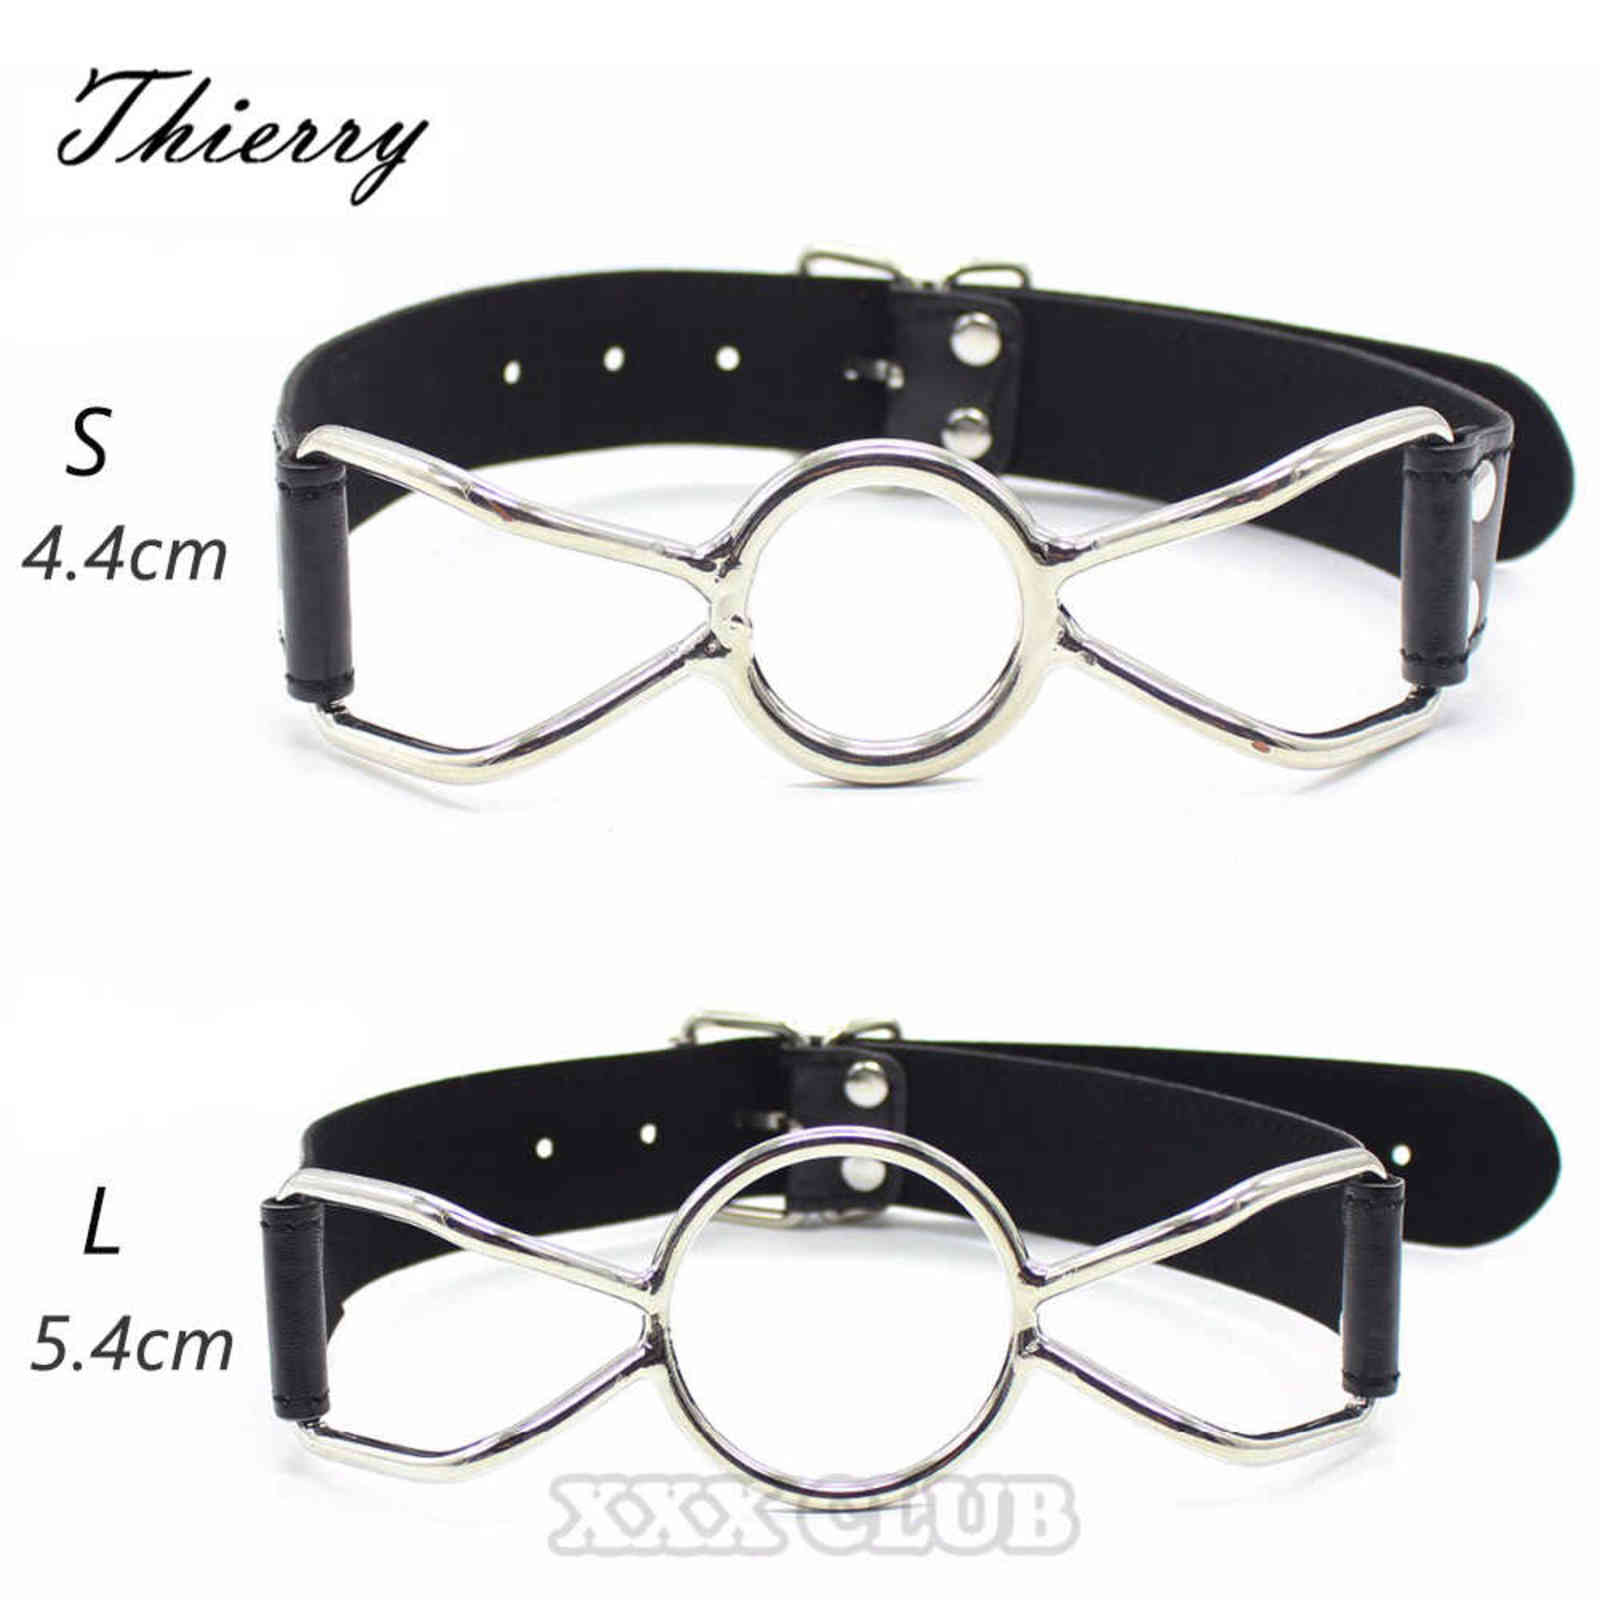 

Nxy Adult Toys Thierry Sex Toys Ring Gag Flirting Open Mouth with O-ring During Sexual Bondage Roleplay and Erotic Play for Couples 1120